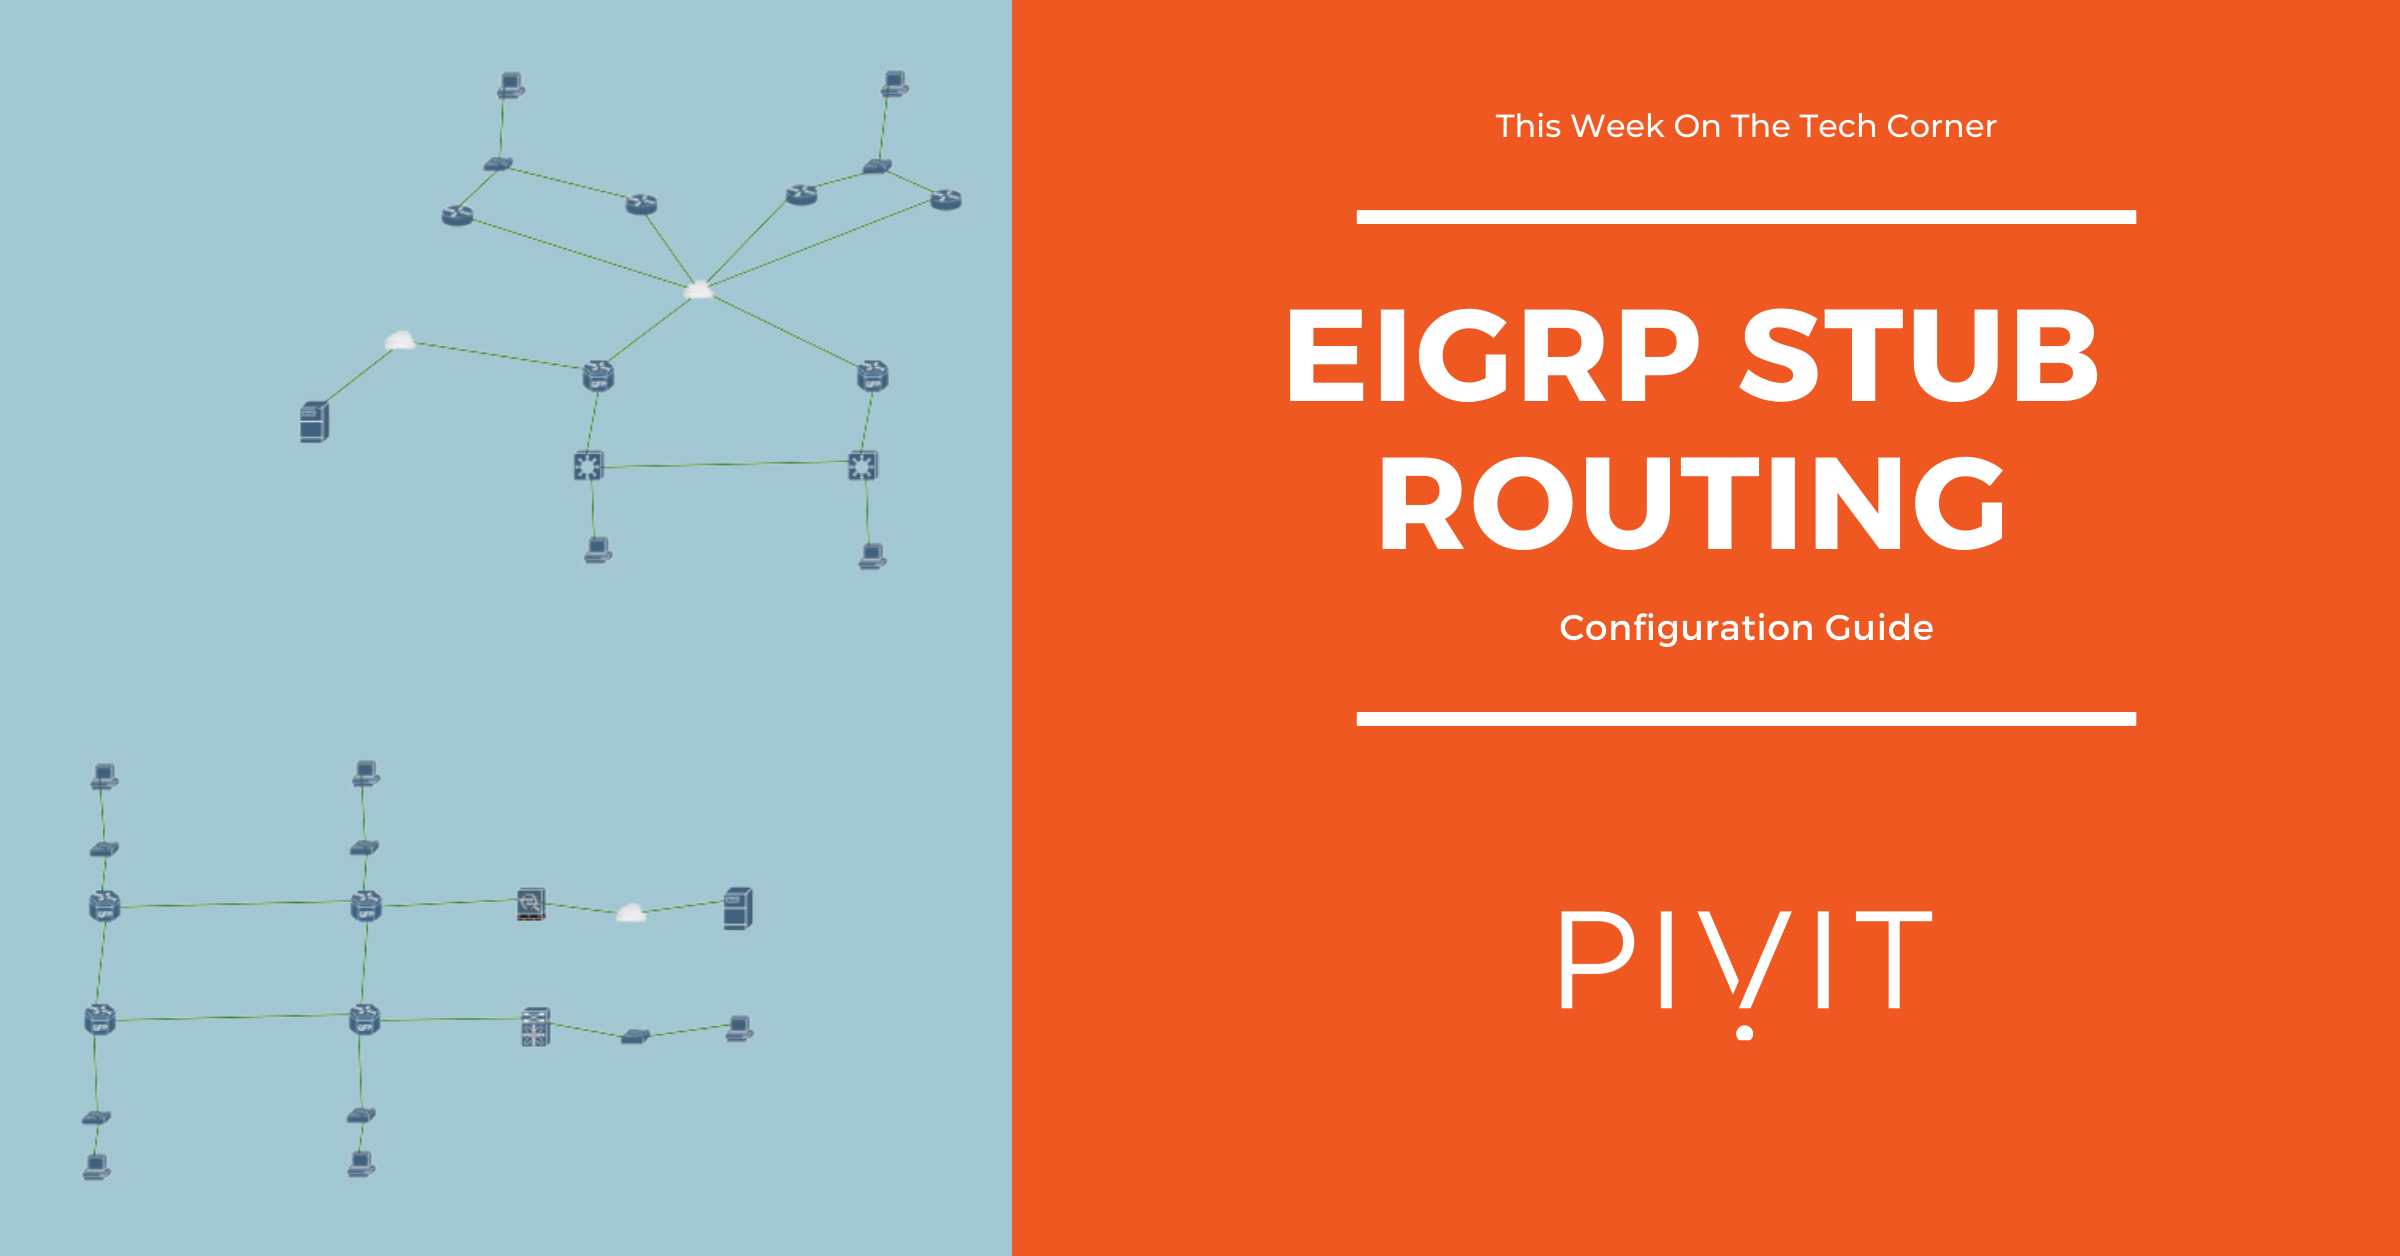 EIGRP configuration with stub routing